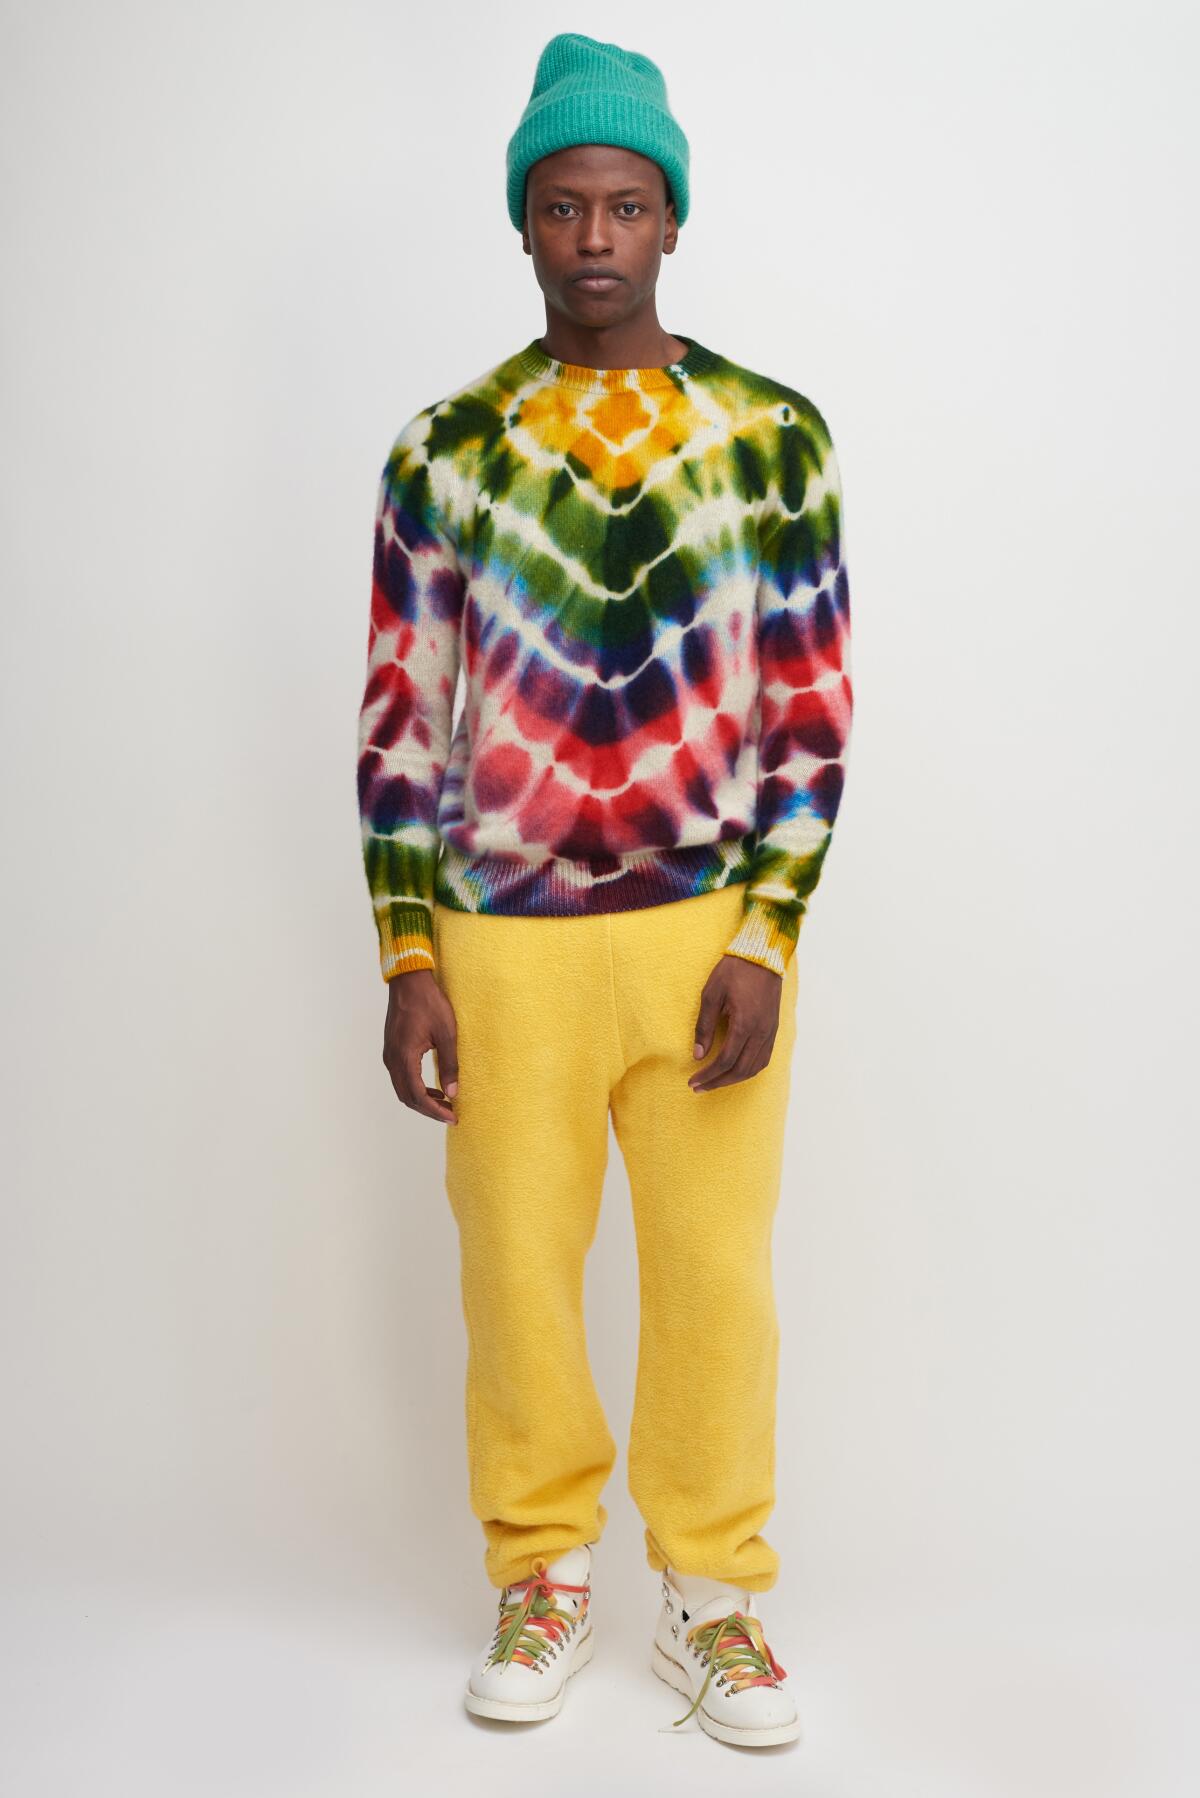 A model wears yellow pants and a tie-dye shirt from the Elder Statesman.